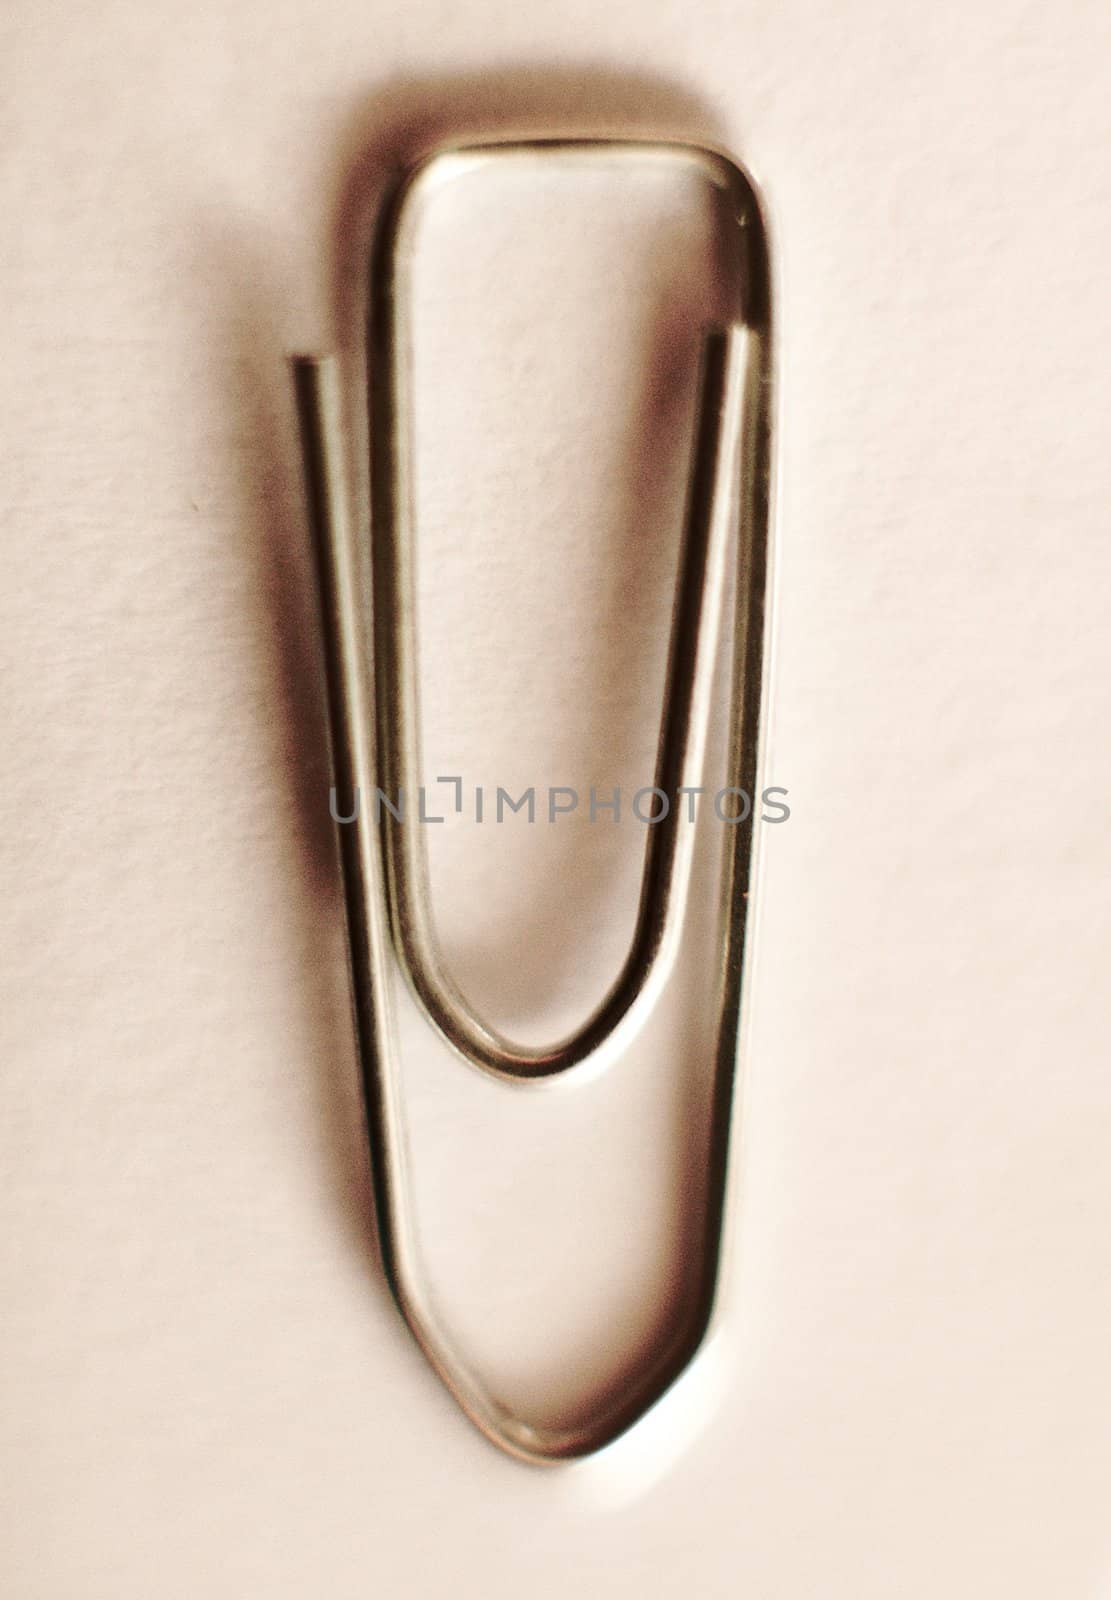 Paperclip up close by sundaune